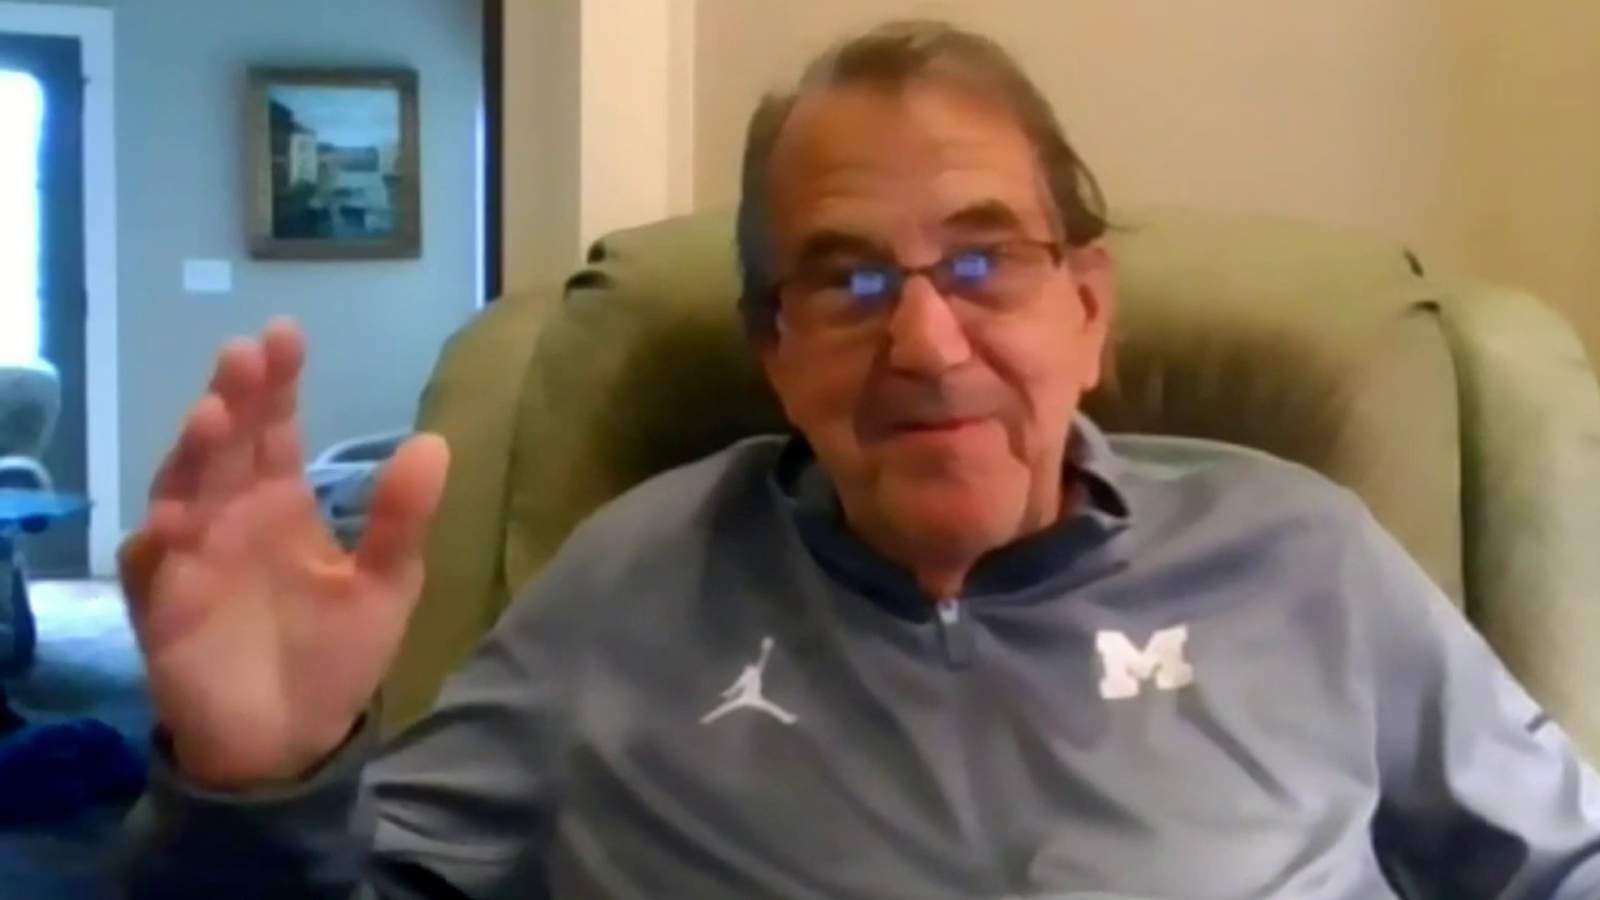 Benched: Former University of Michigan coach Lloyd Carr on college football amid pandemic, who hes Zooming with